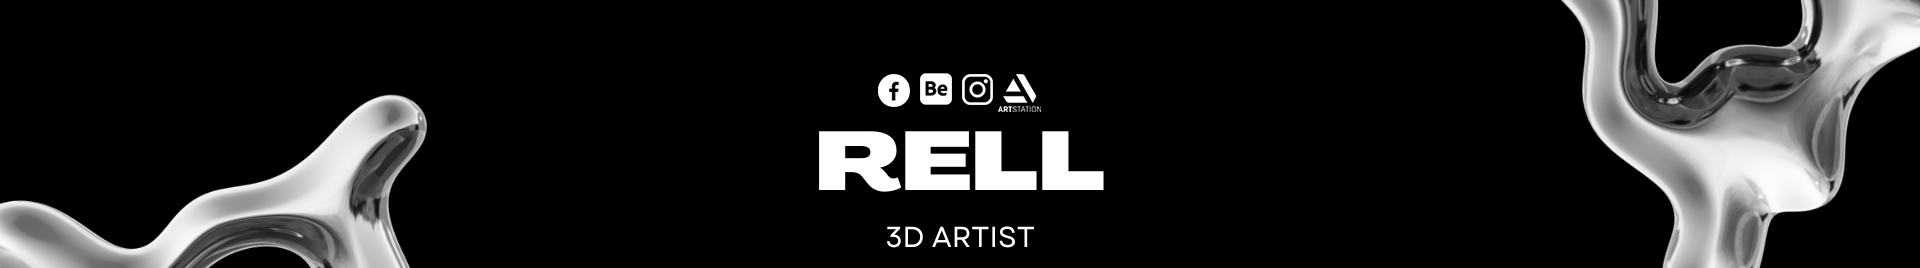 Rell 3D's profile banner